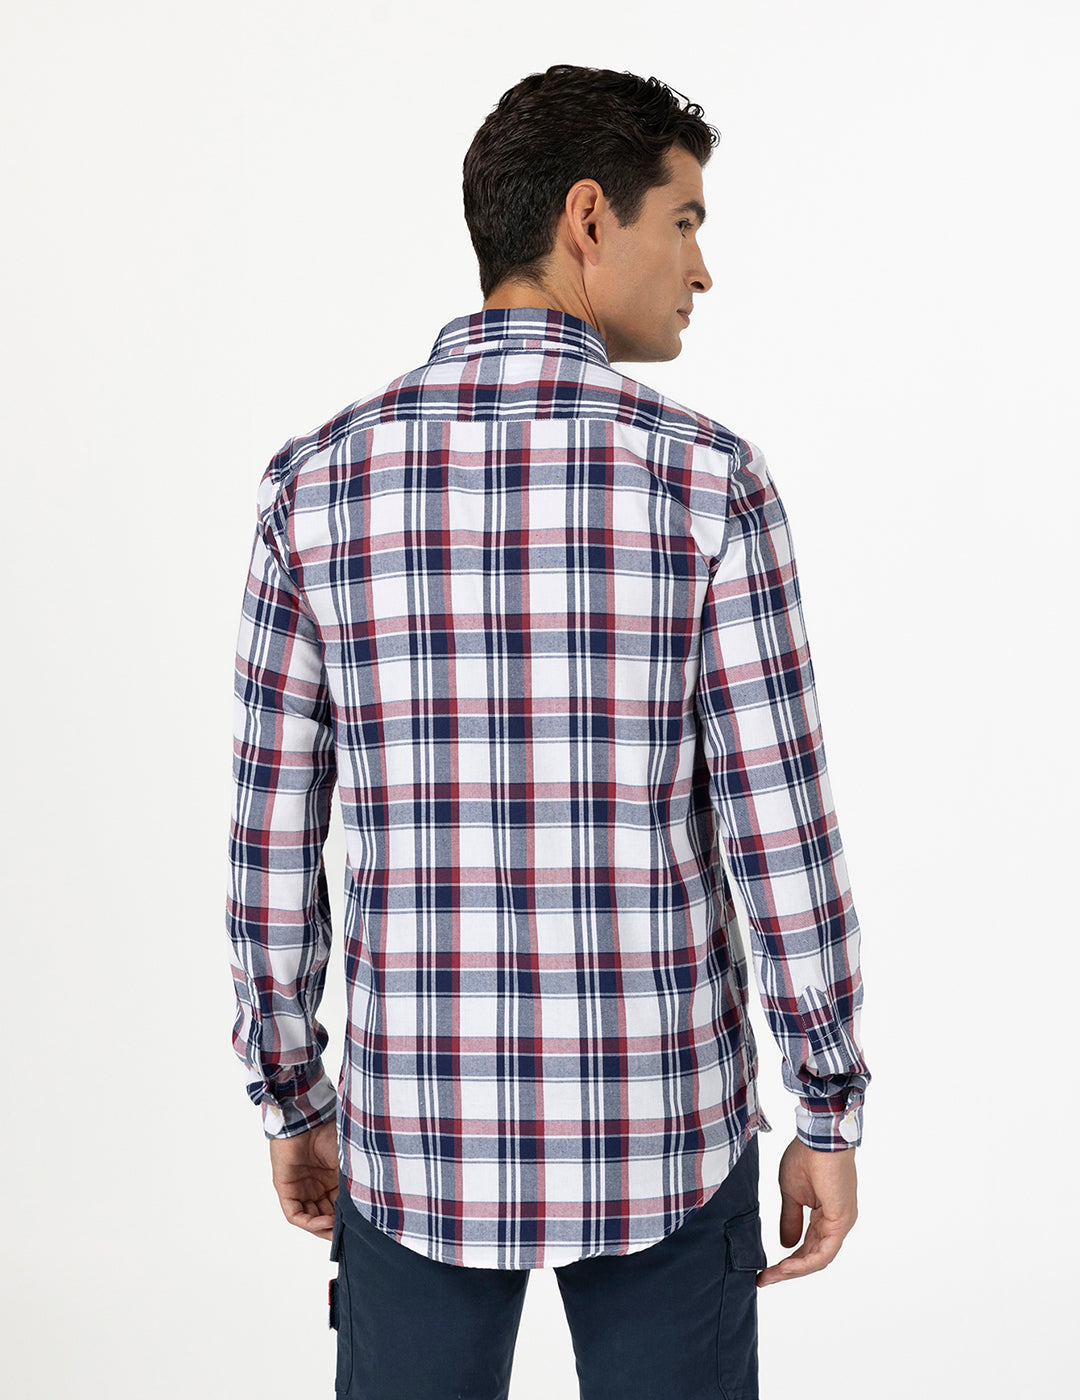 CAMISA DOUBLE HIGH CHECK GROSELLA